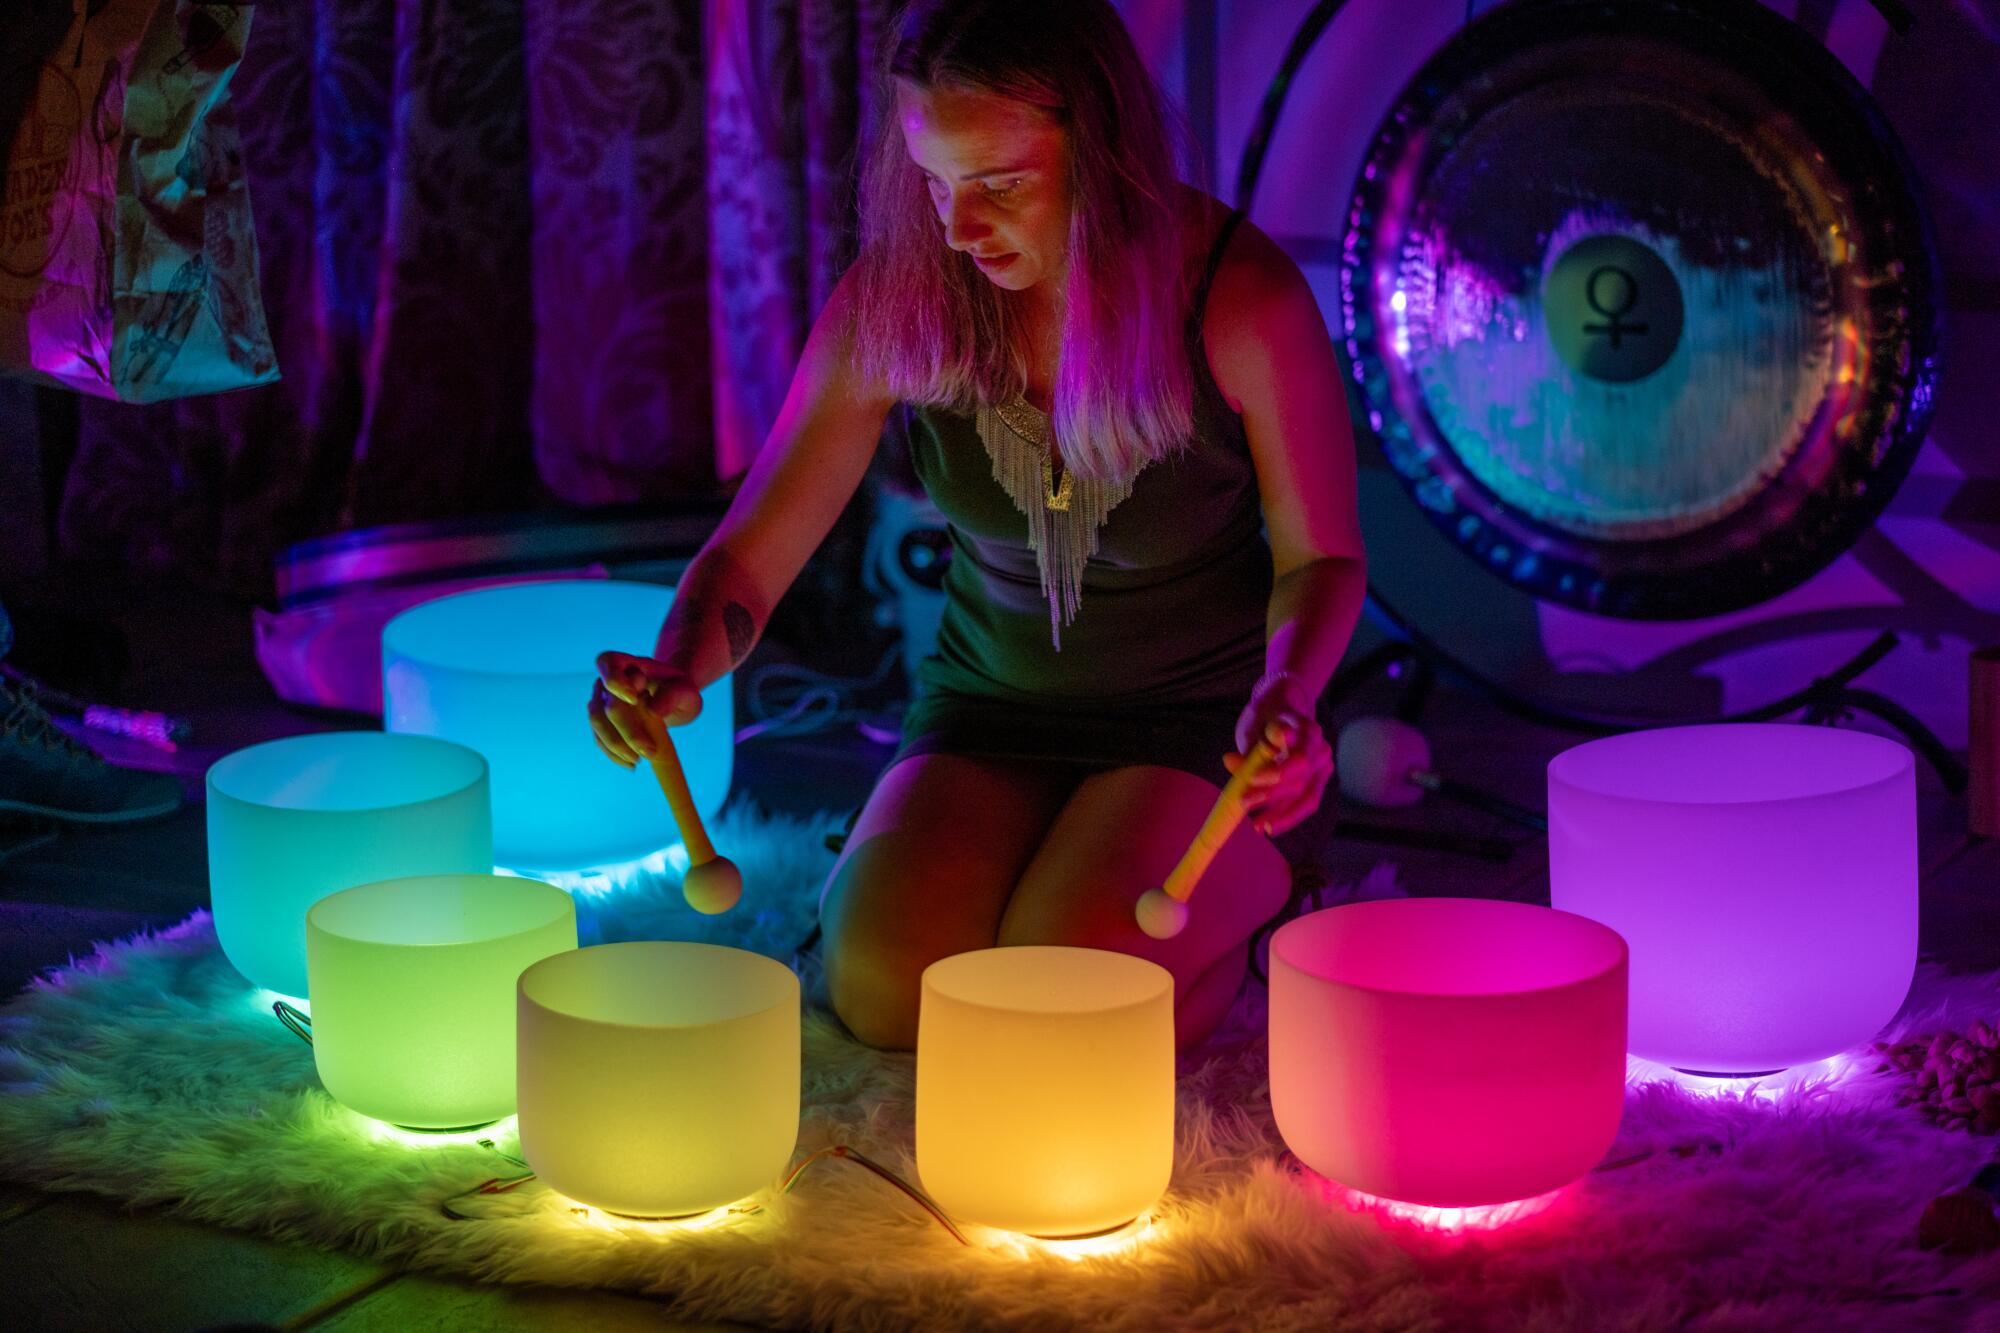 A woman plays crystal bowls illuminated with a variety of colors.